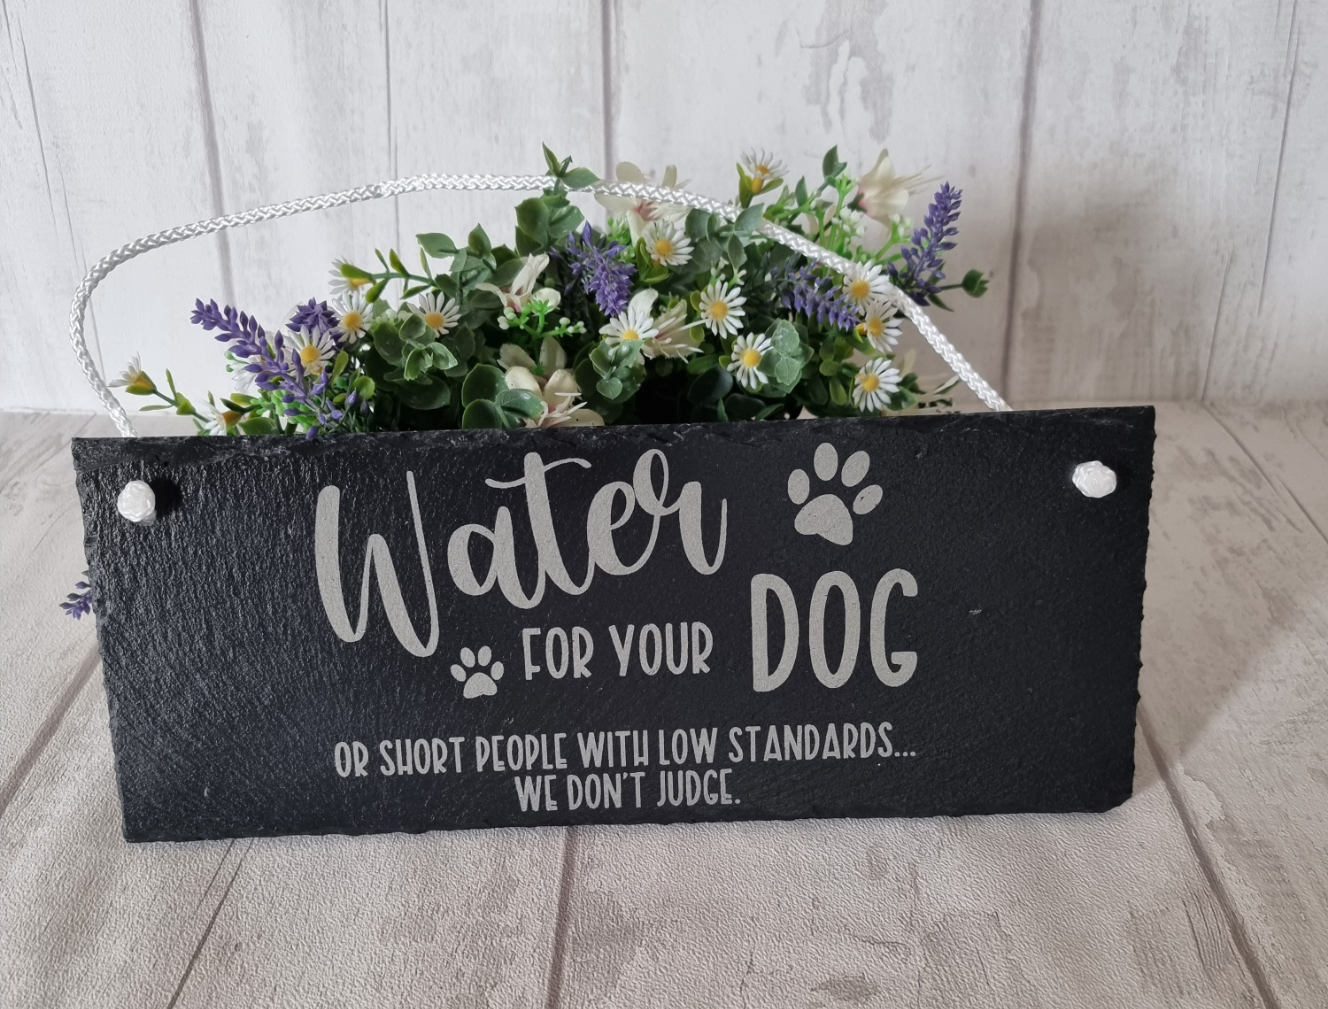 Funny slate sign for dogs.